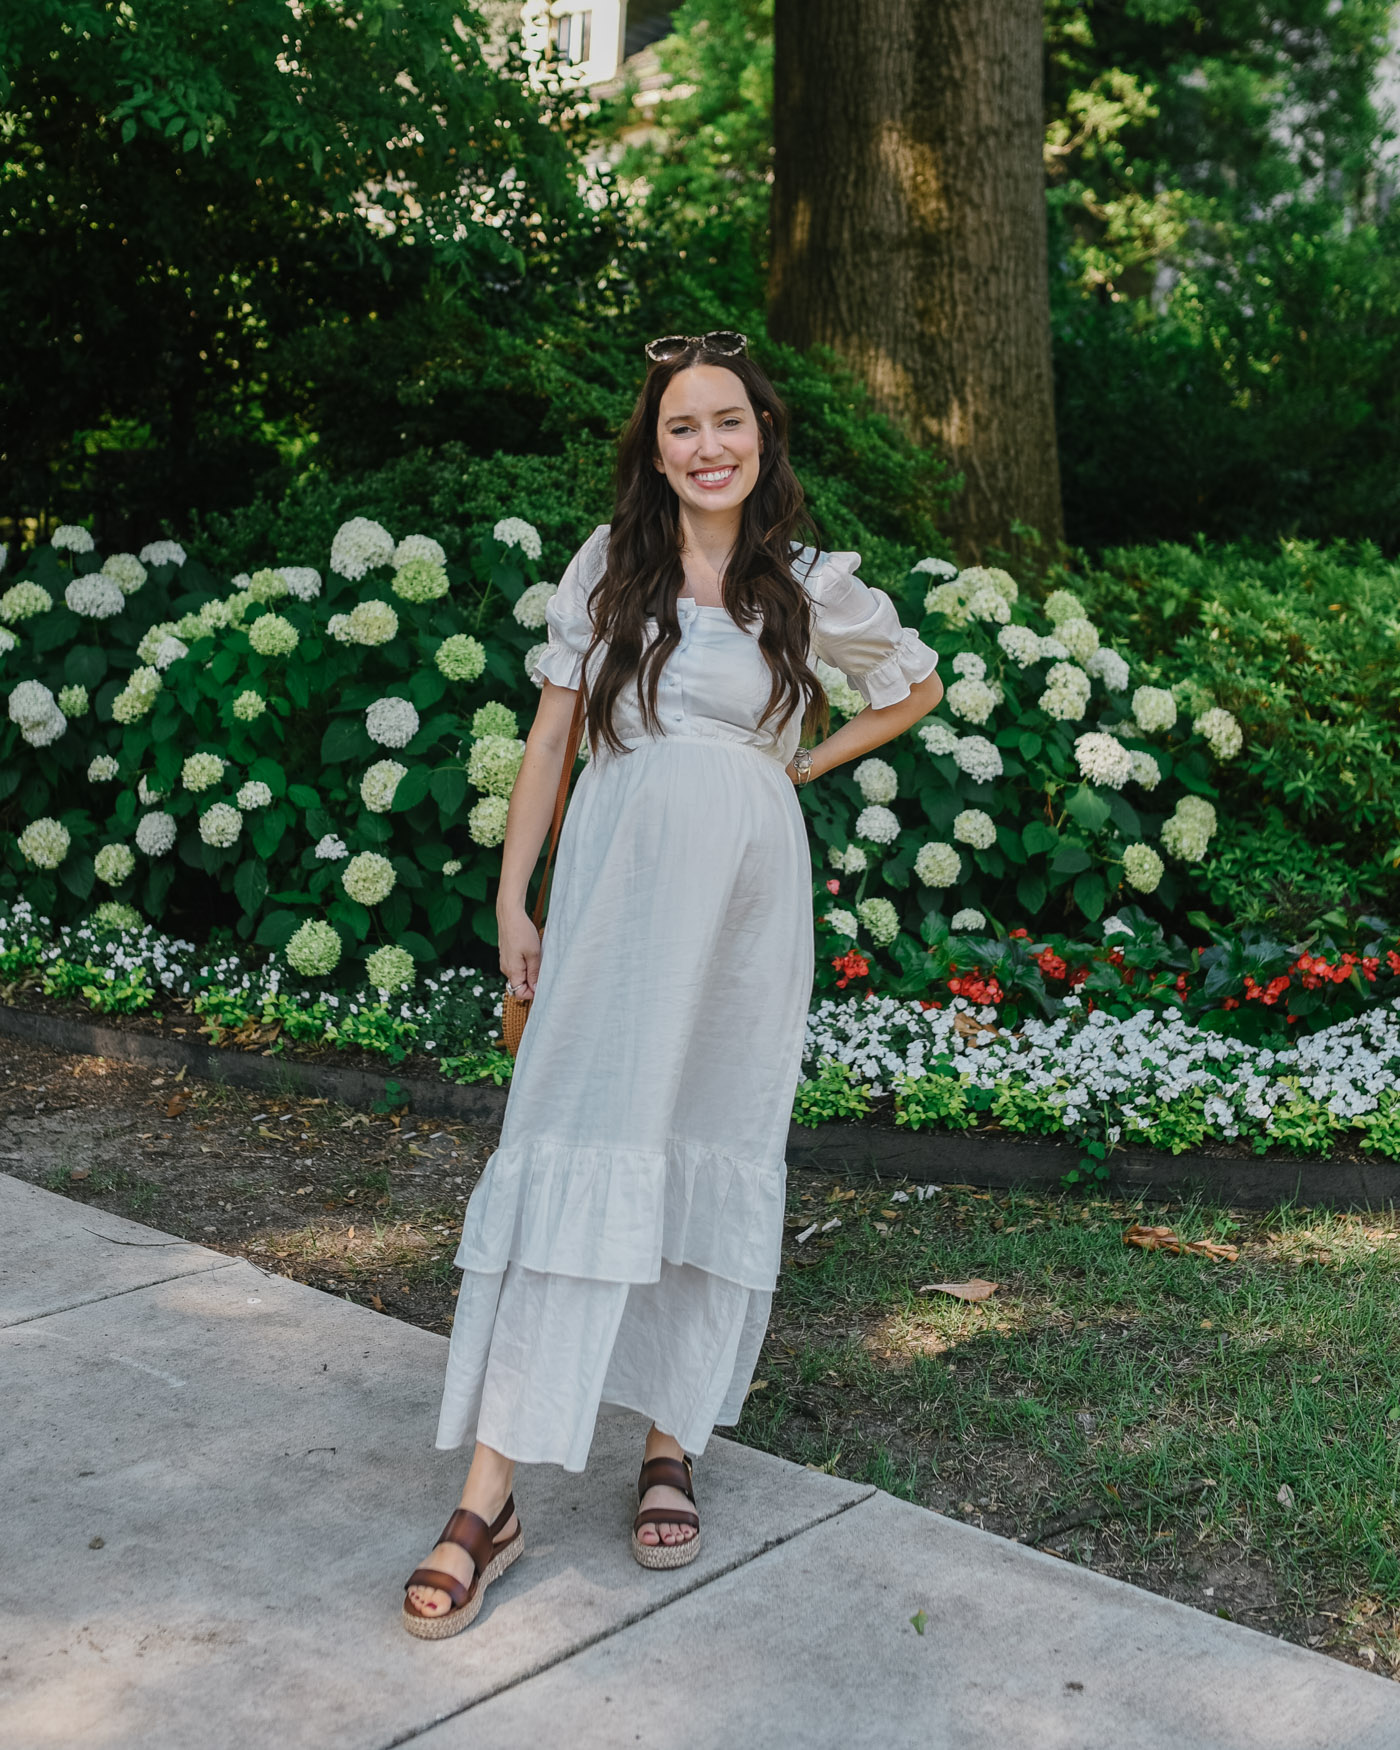 Famous Footwear Sandals by popular Memphis fashion blog, Lone Star Looking Glass: image of a woman wearing a white maxi dress, Famous Footwear WOMEN'S PATIENCE ESPADRILLE PLATFORM SANDAL, and carrying a wicker circle bag. 